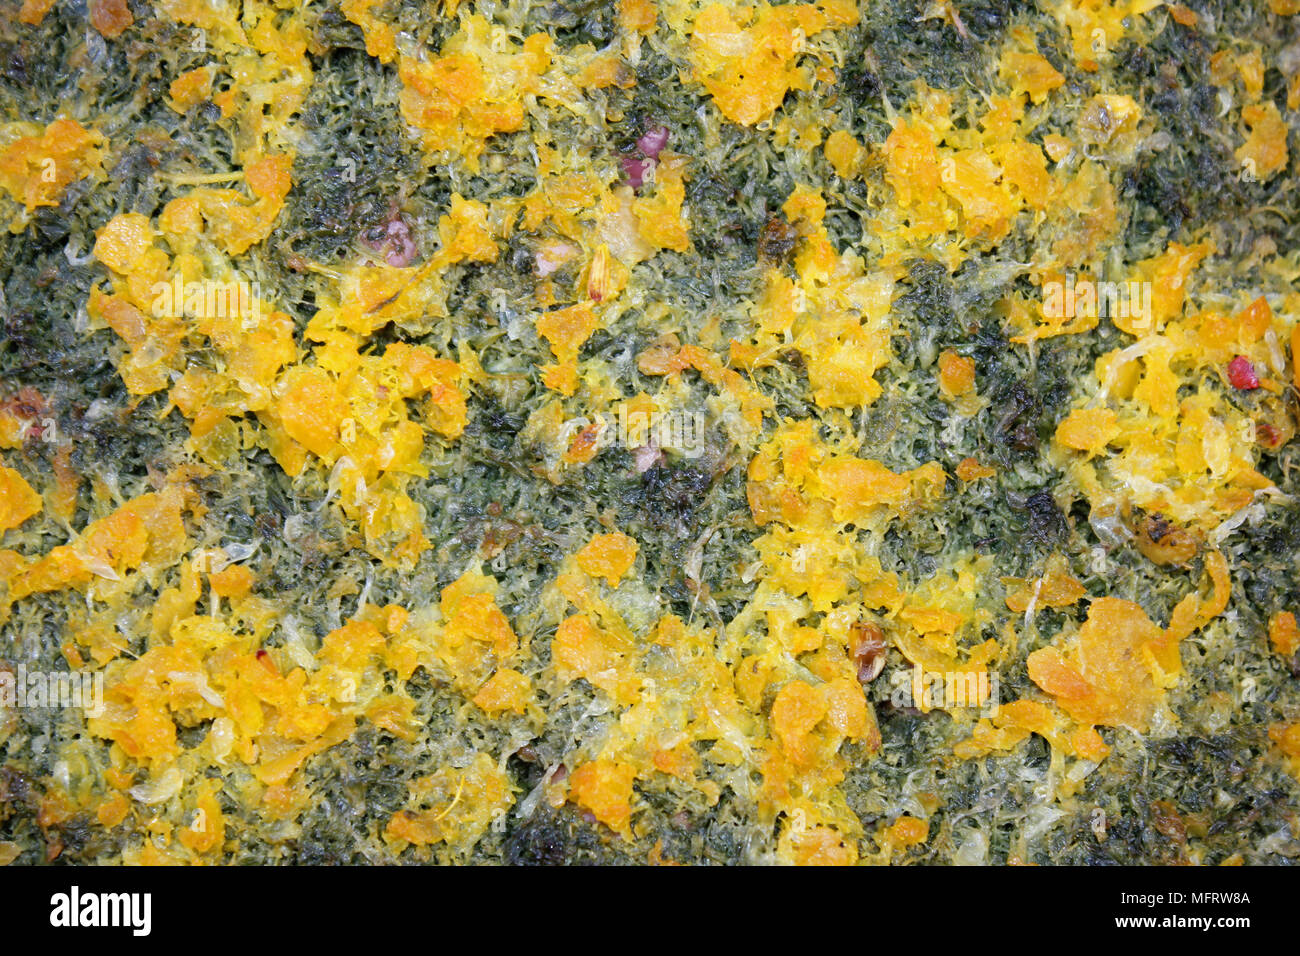 Black Olive Paste Covered In Yellow, Morocco Stock Photo